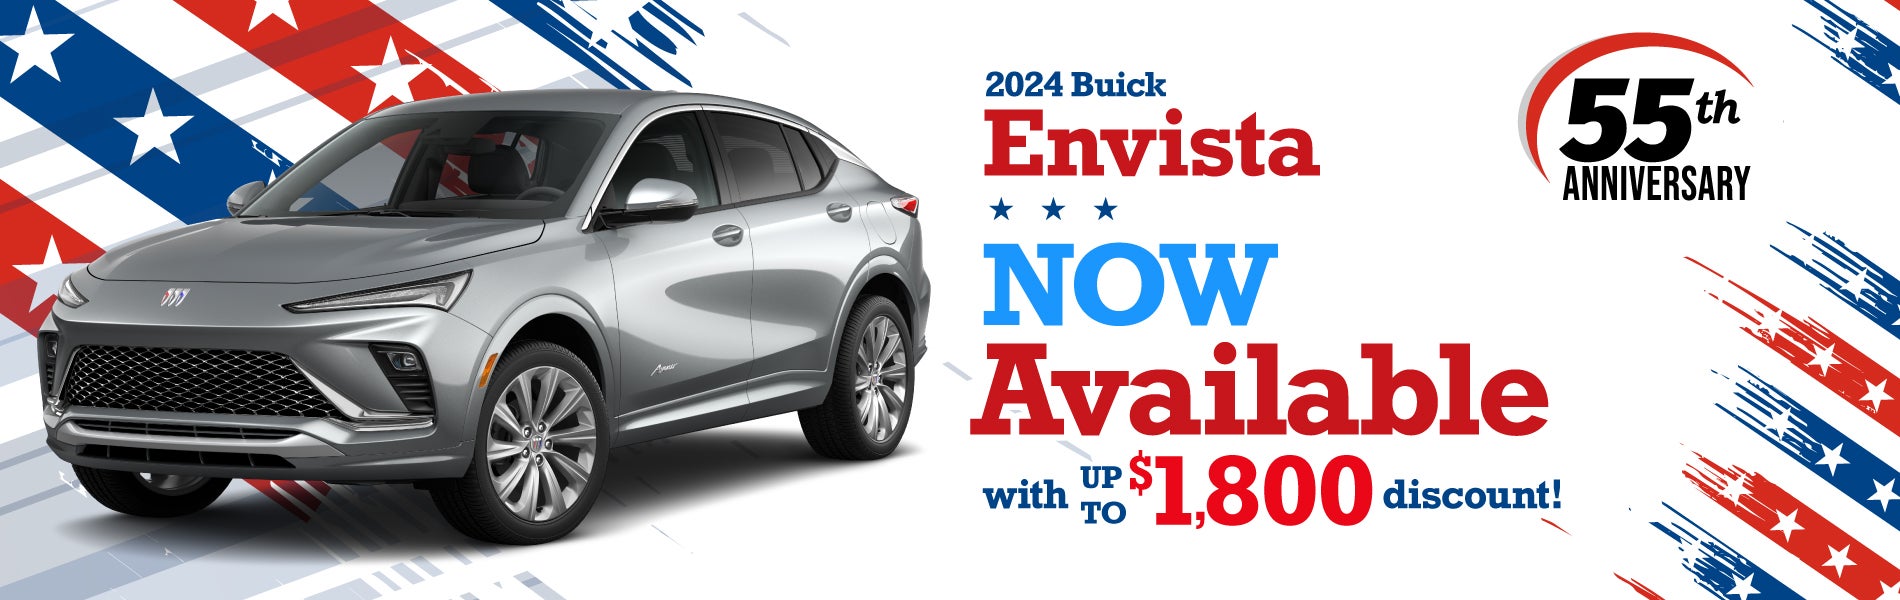 2024 Buick Envista NOW AVAILABLE with $1800 discount